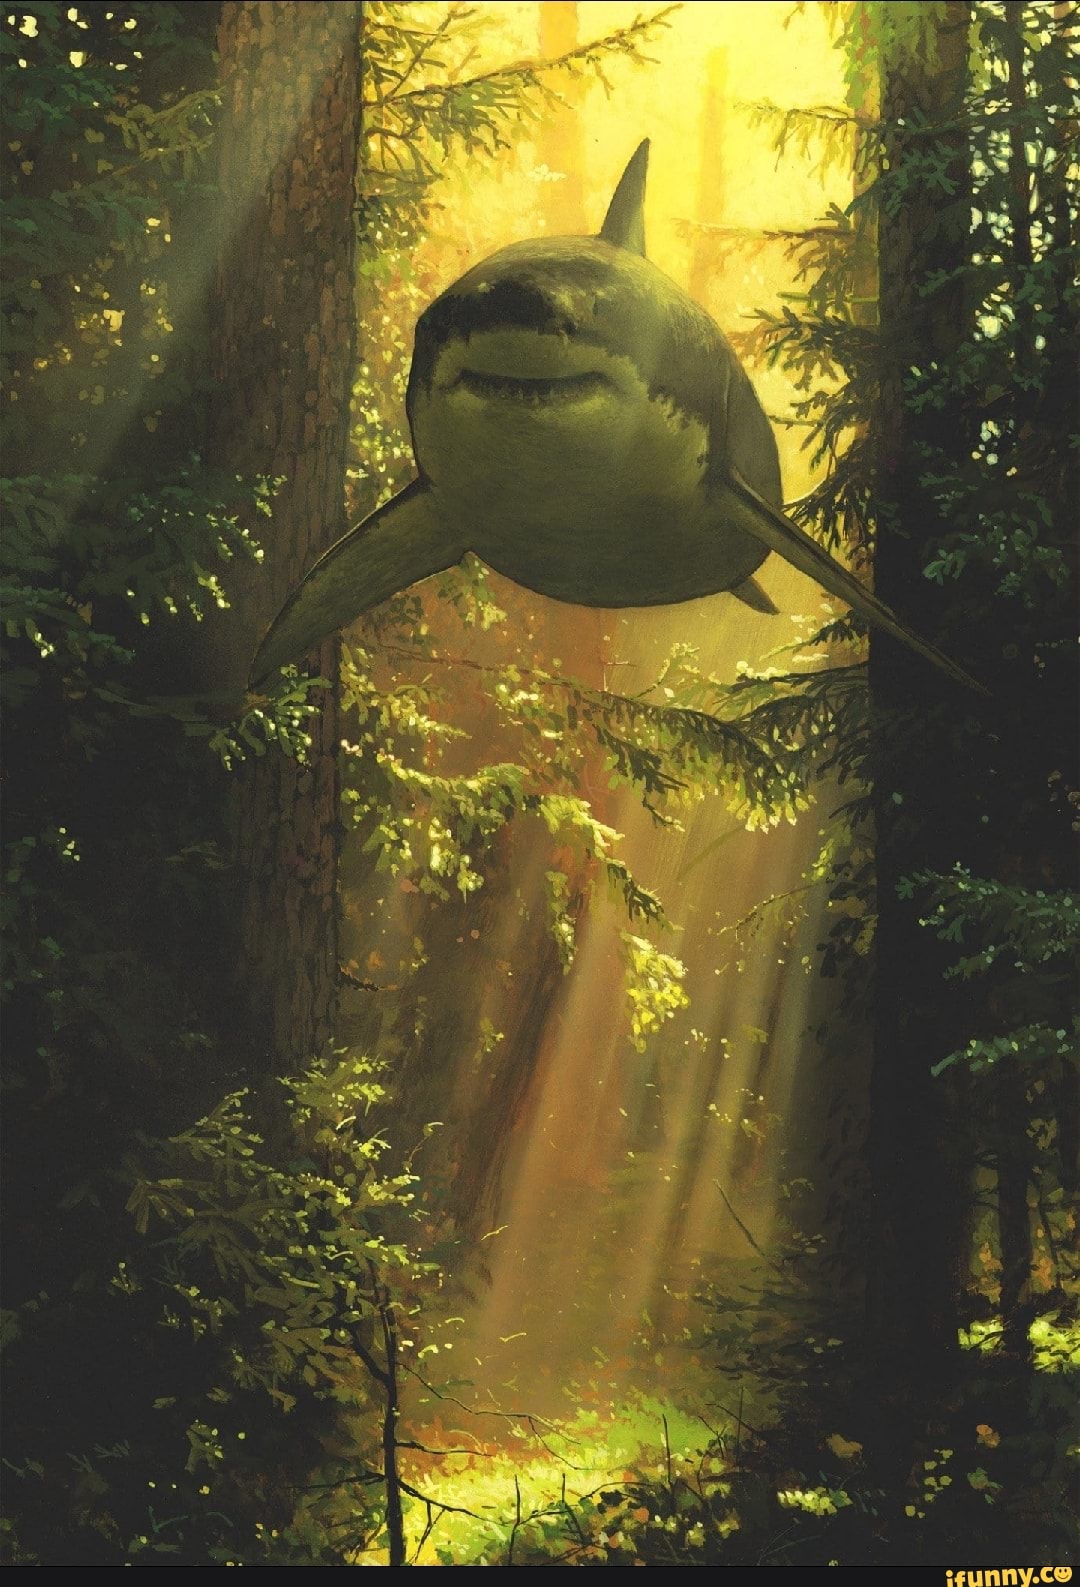 shark in a forest meme